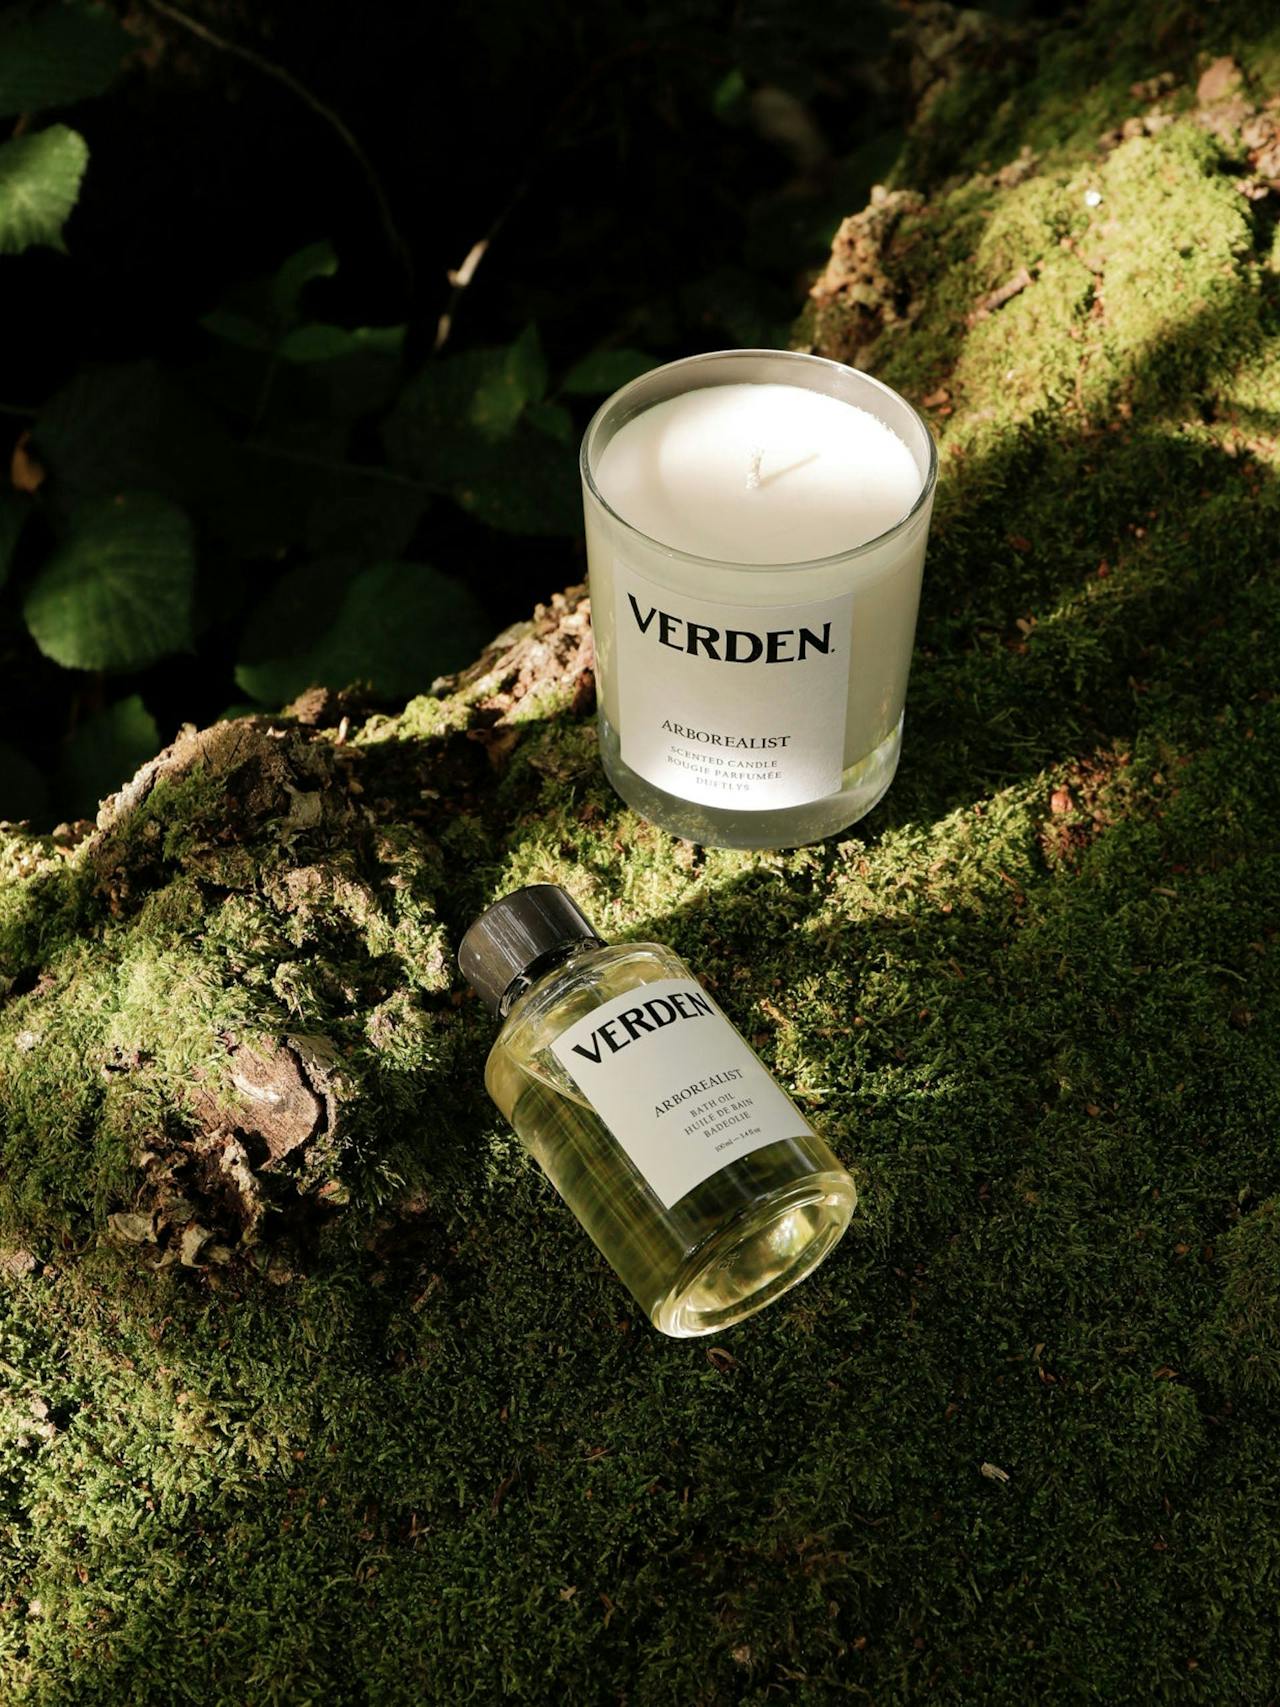 A rich and indulgent Verden bath oil to care for skin, body and mind. Collagerie.com